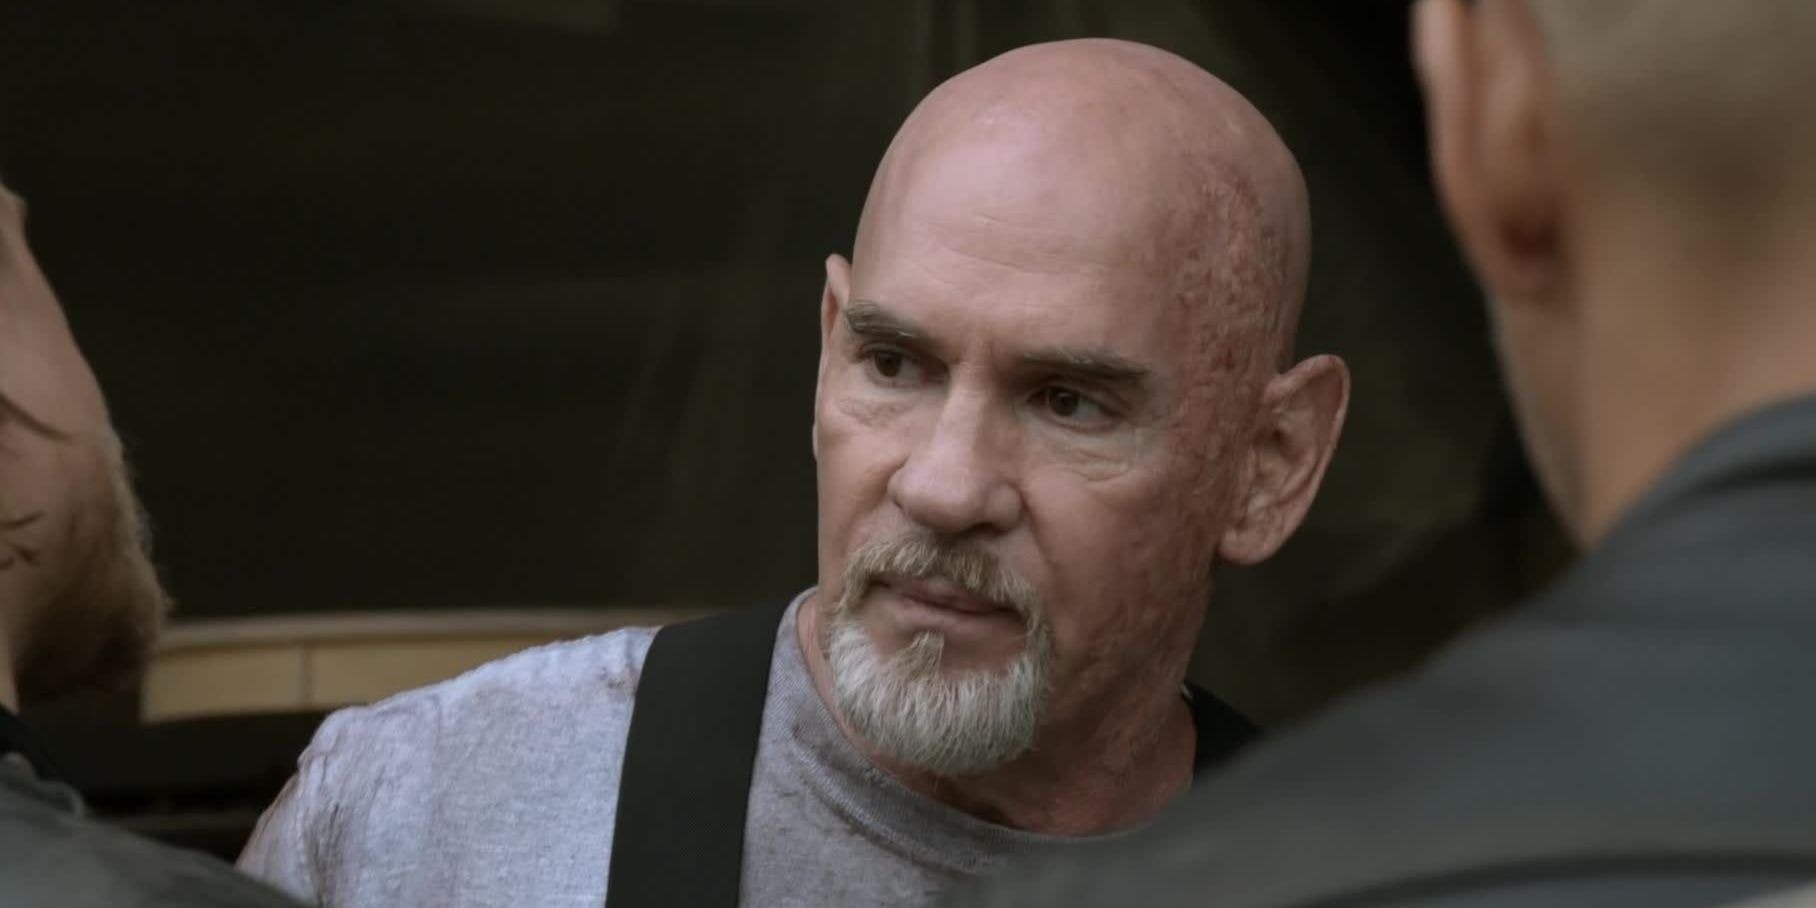 Ernest Darby talking to someone in Sons of Anarchy.